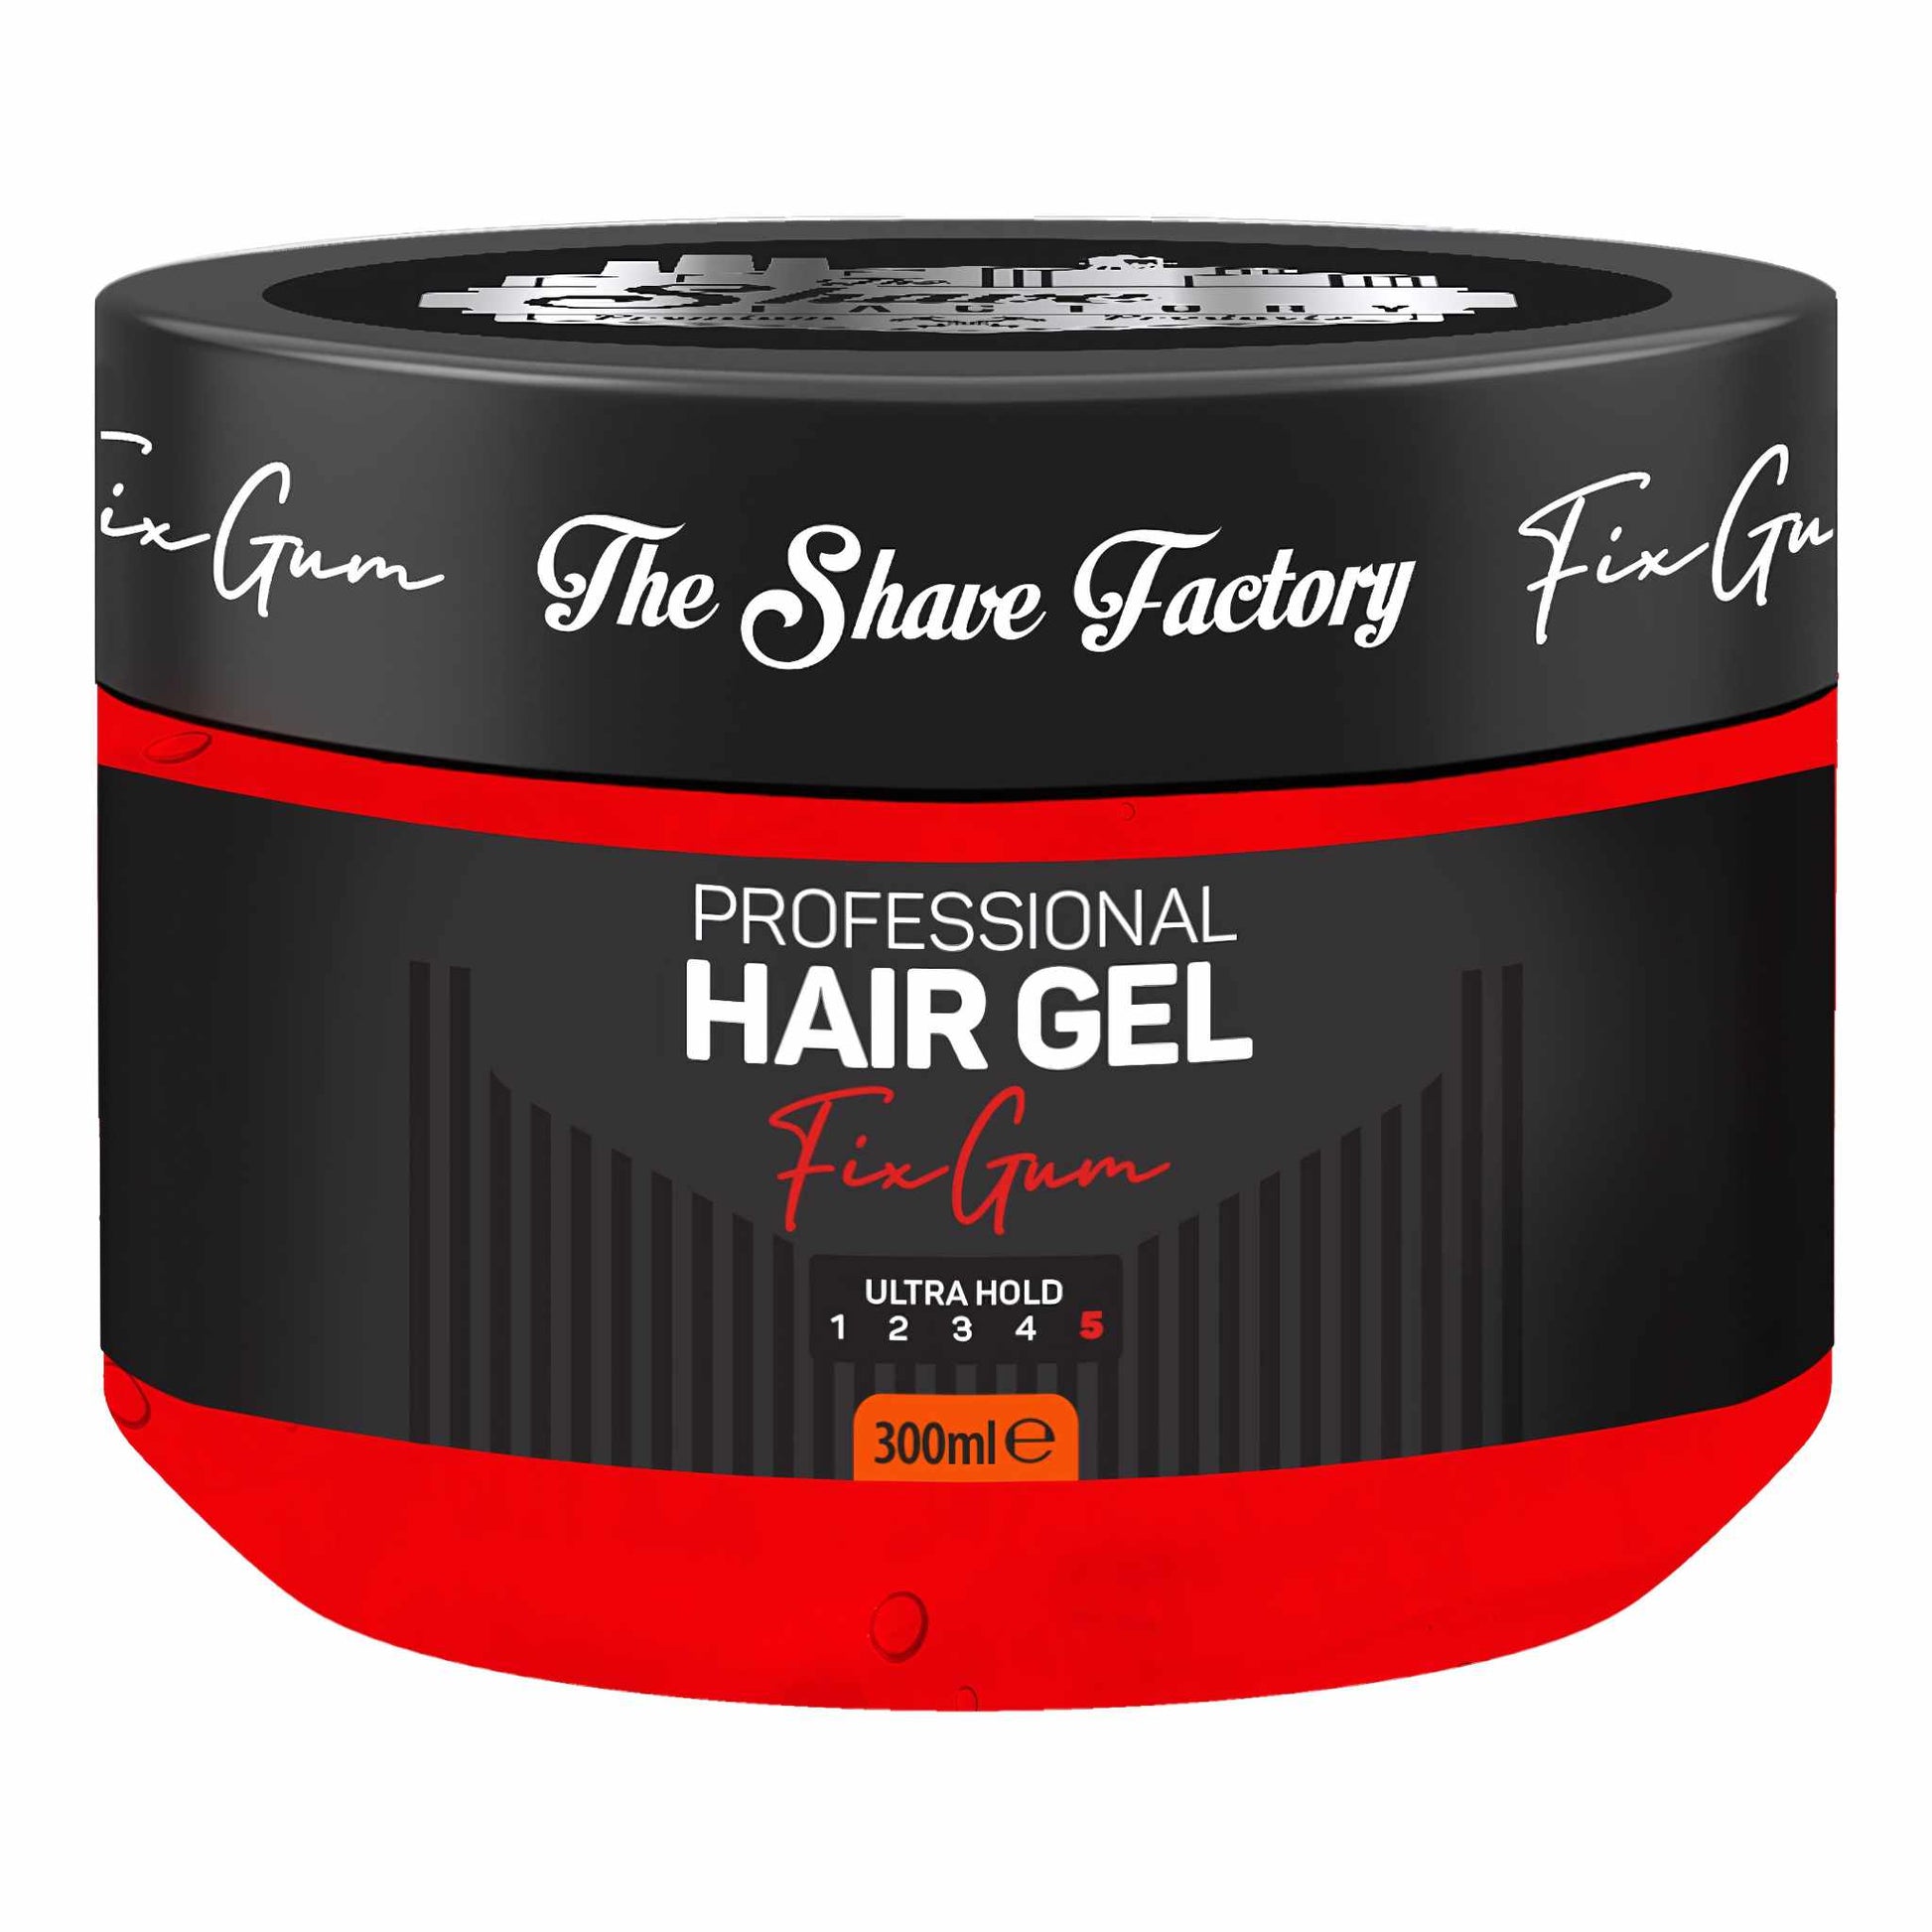 The Shave Factory Hair Gel Fix Gum Ultra Hold 300 ml